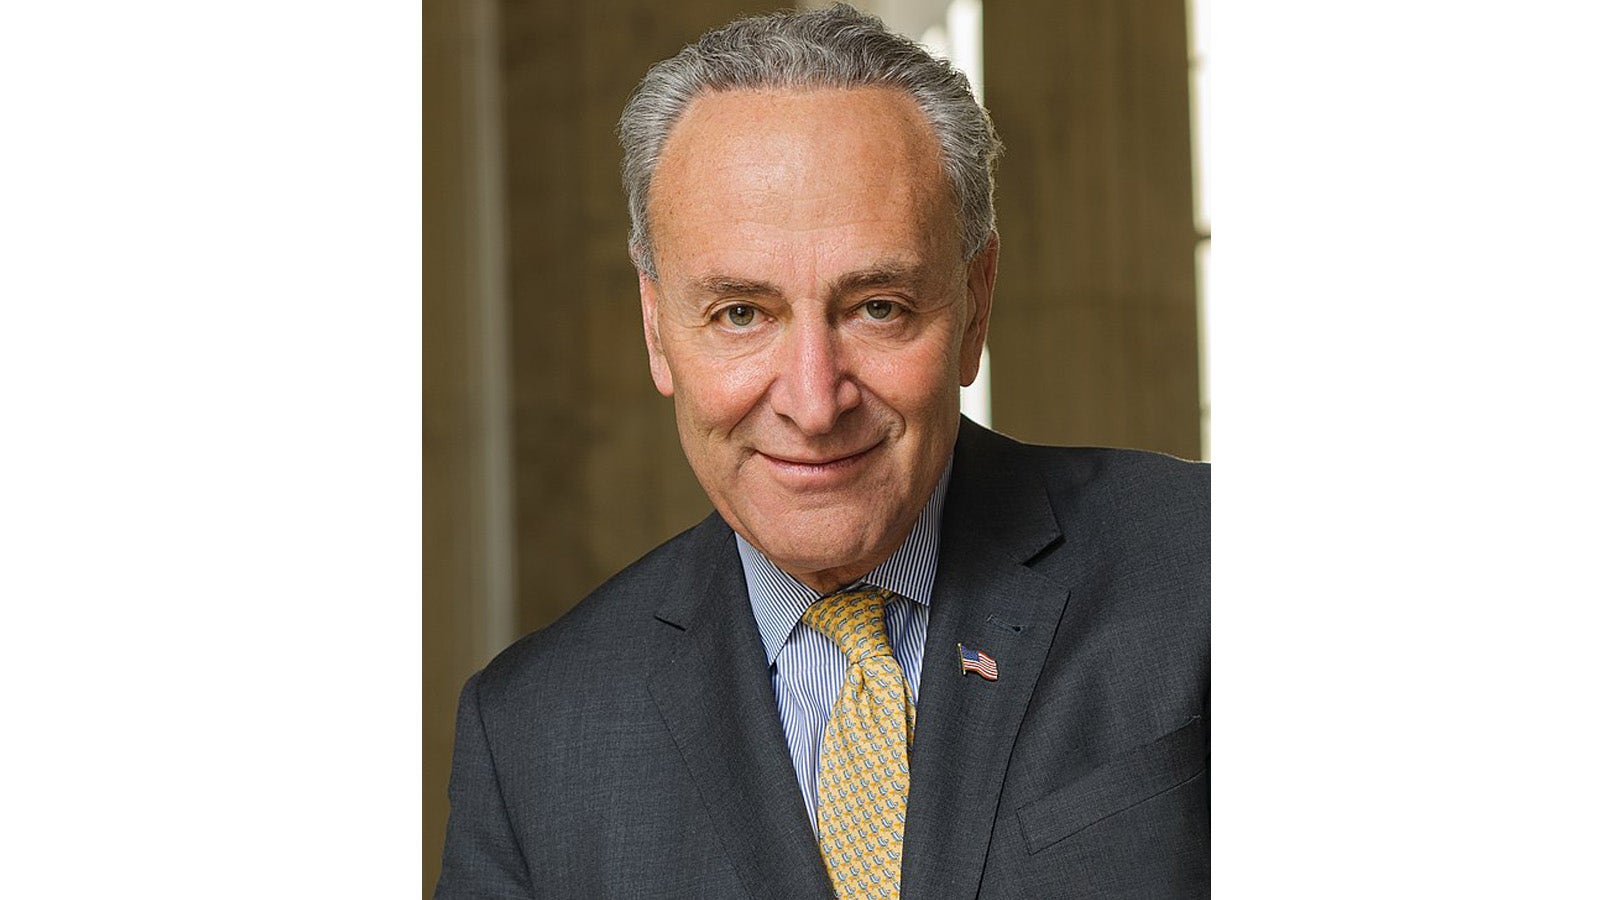 Is A Compromise On The Horizon? Why Schumer Might Act On Cannabis Banking Sooner Rather Than Later